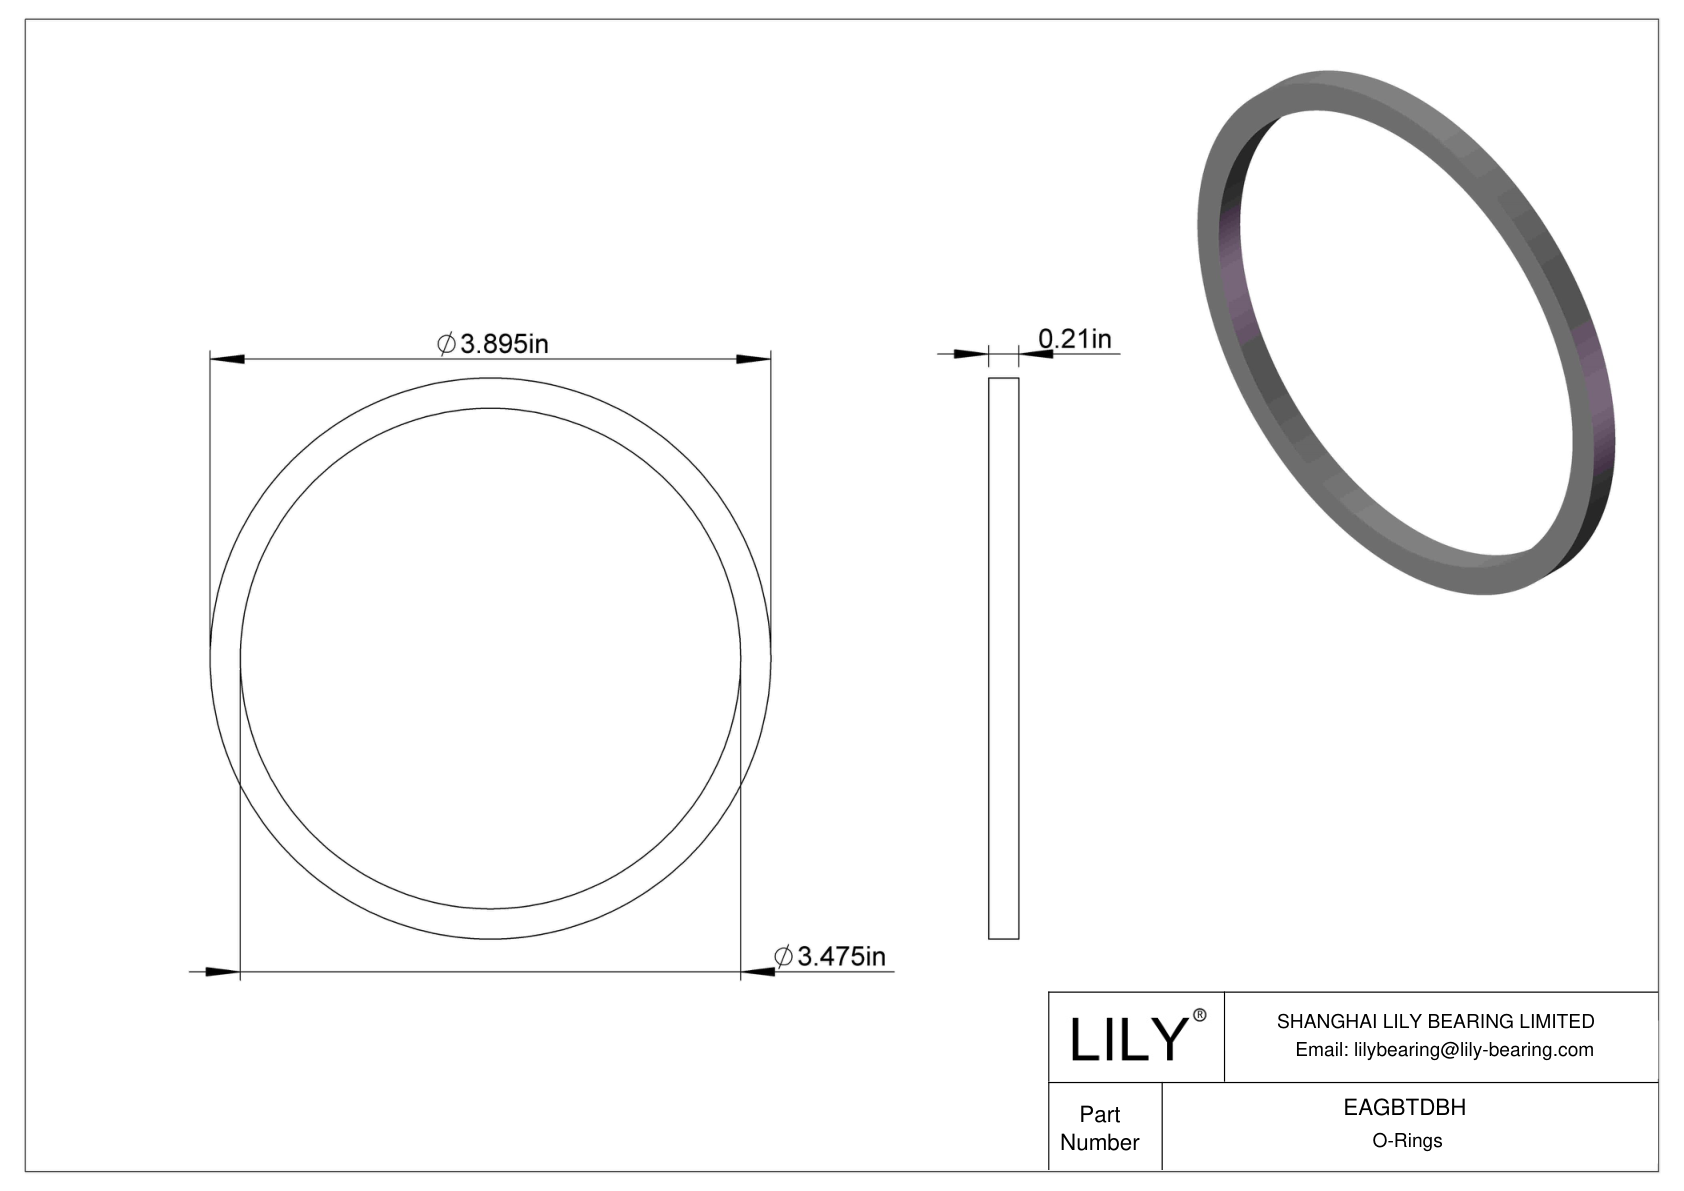 EAGBTDBH Oil Resistant O-Rings Square cad drawing